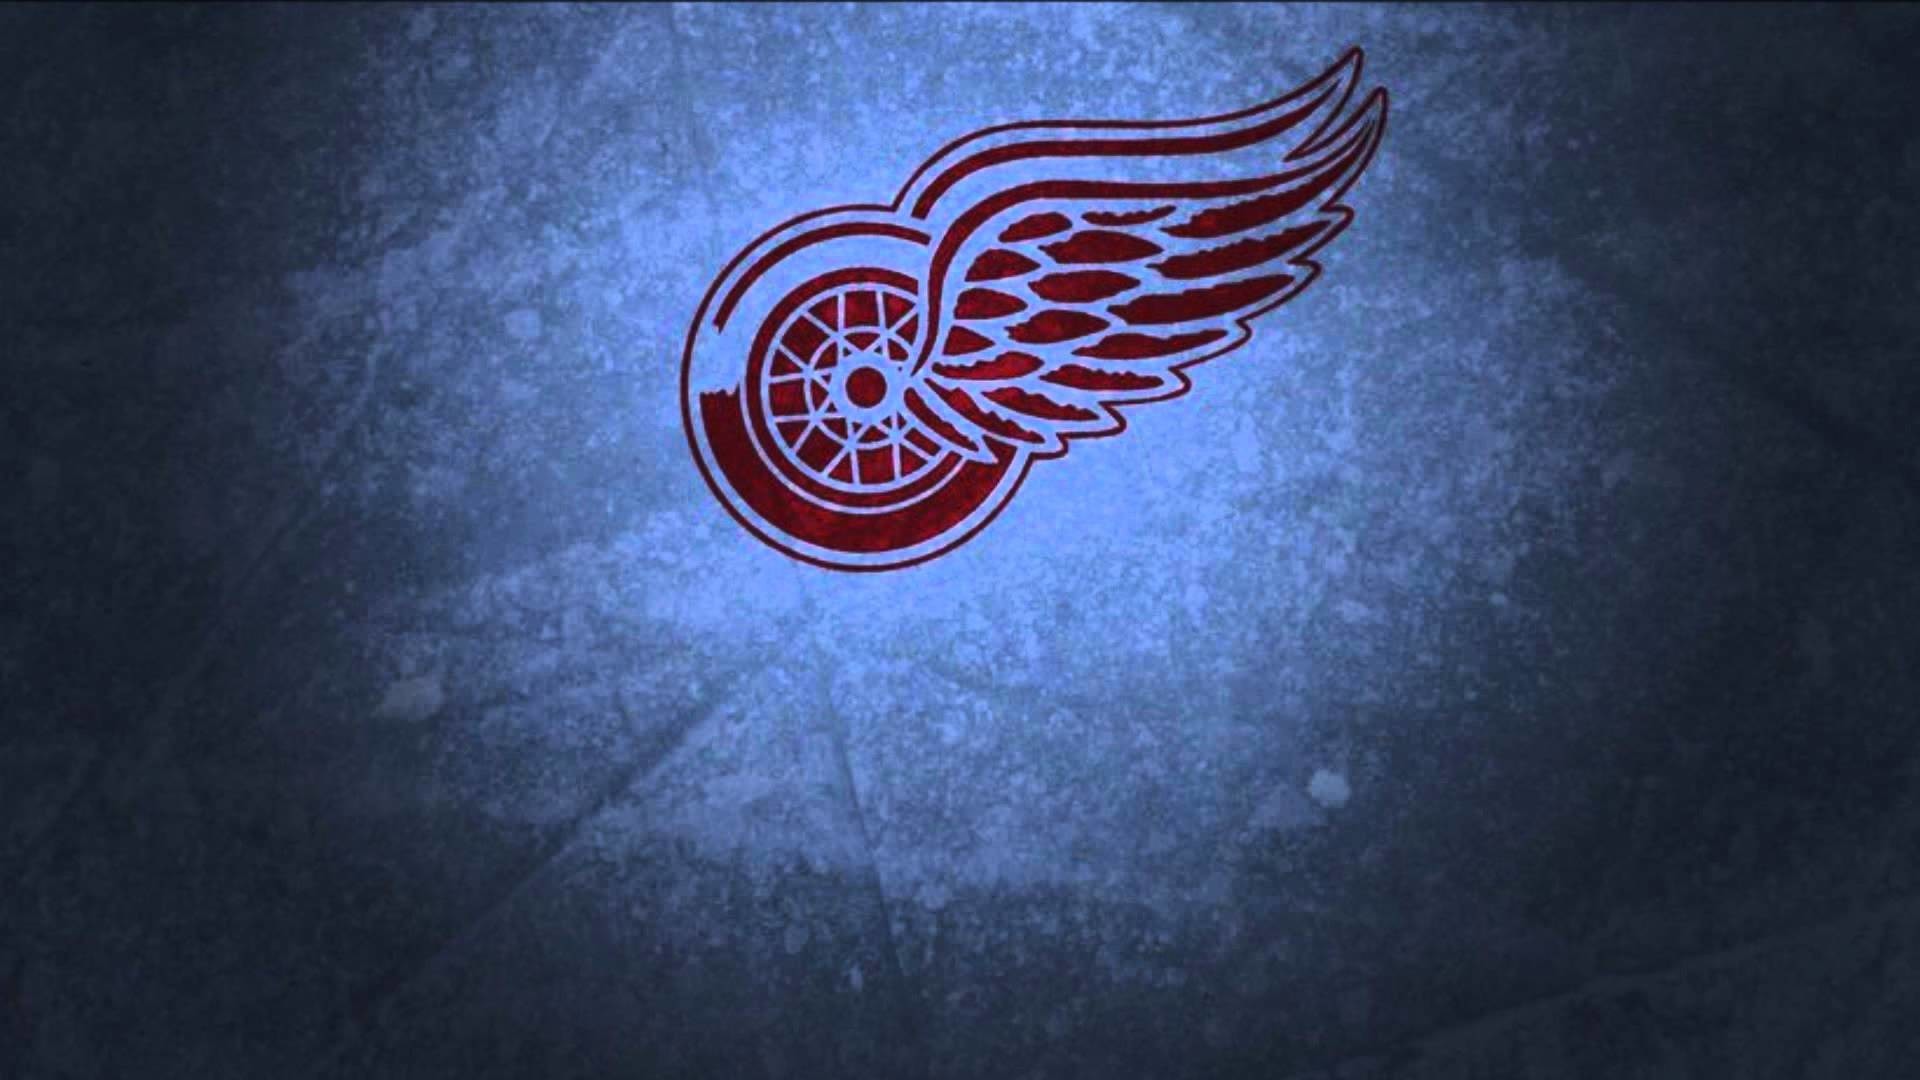 1920x1080  Detroit Red Wings Wallpapers 13 - 1920 X 1080